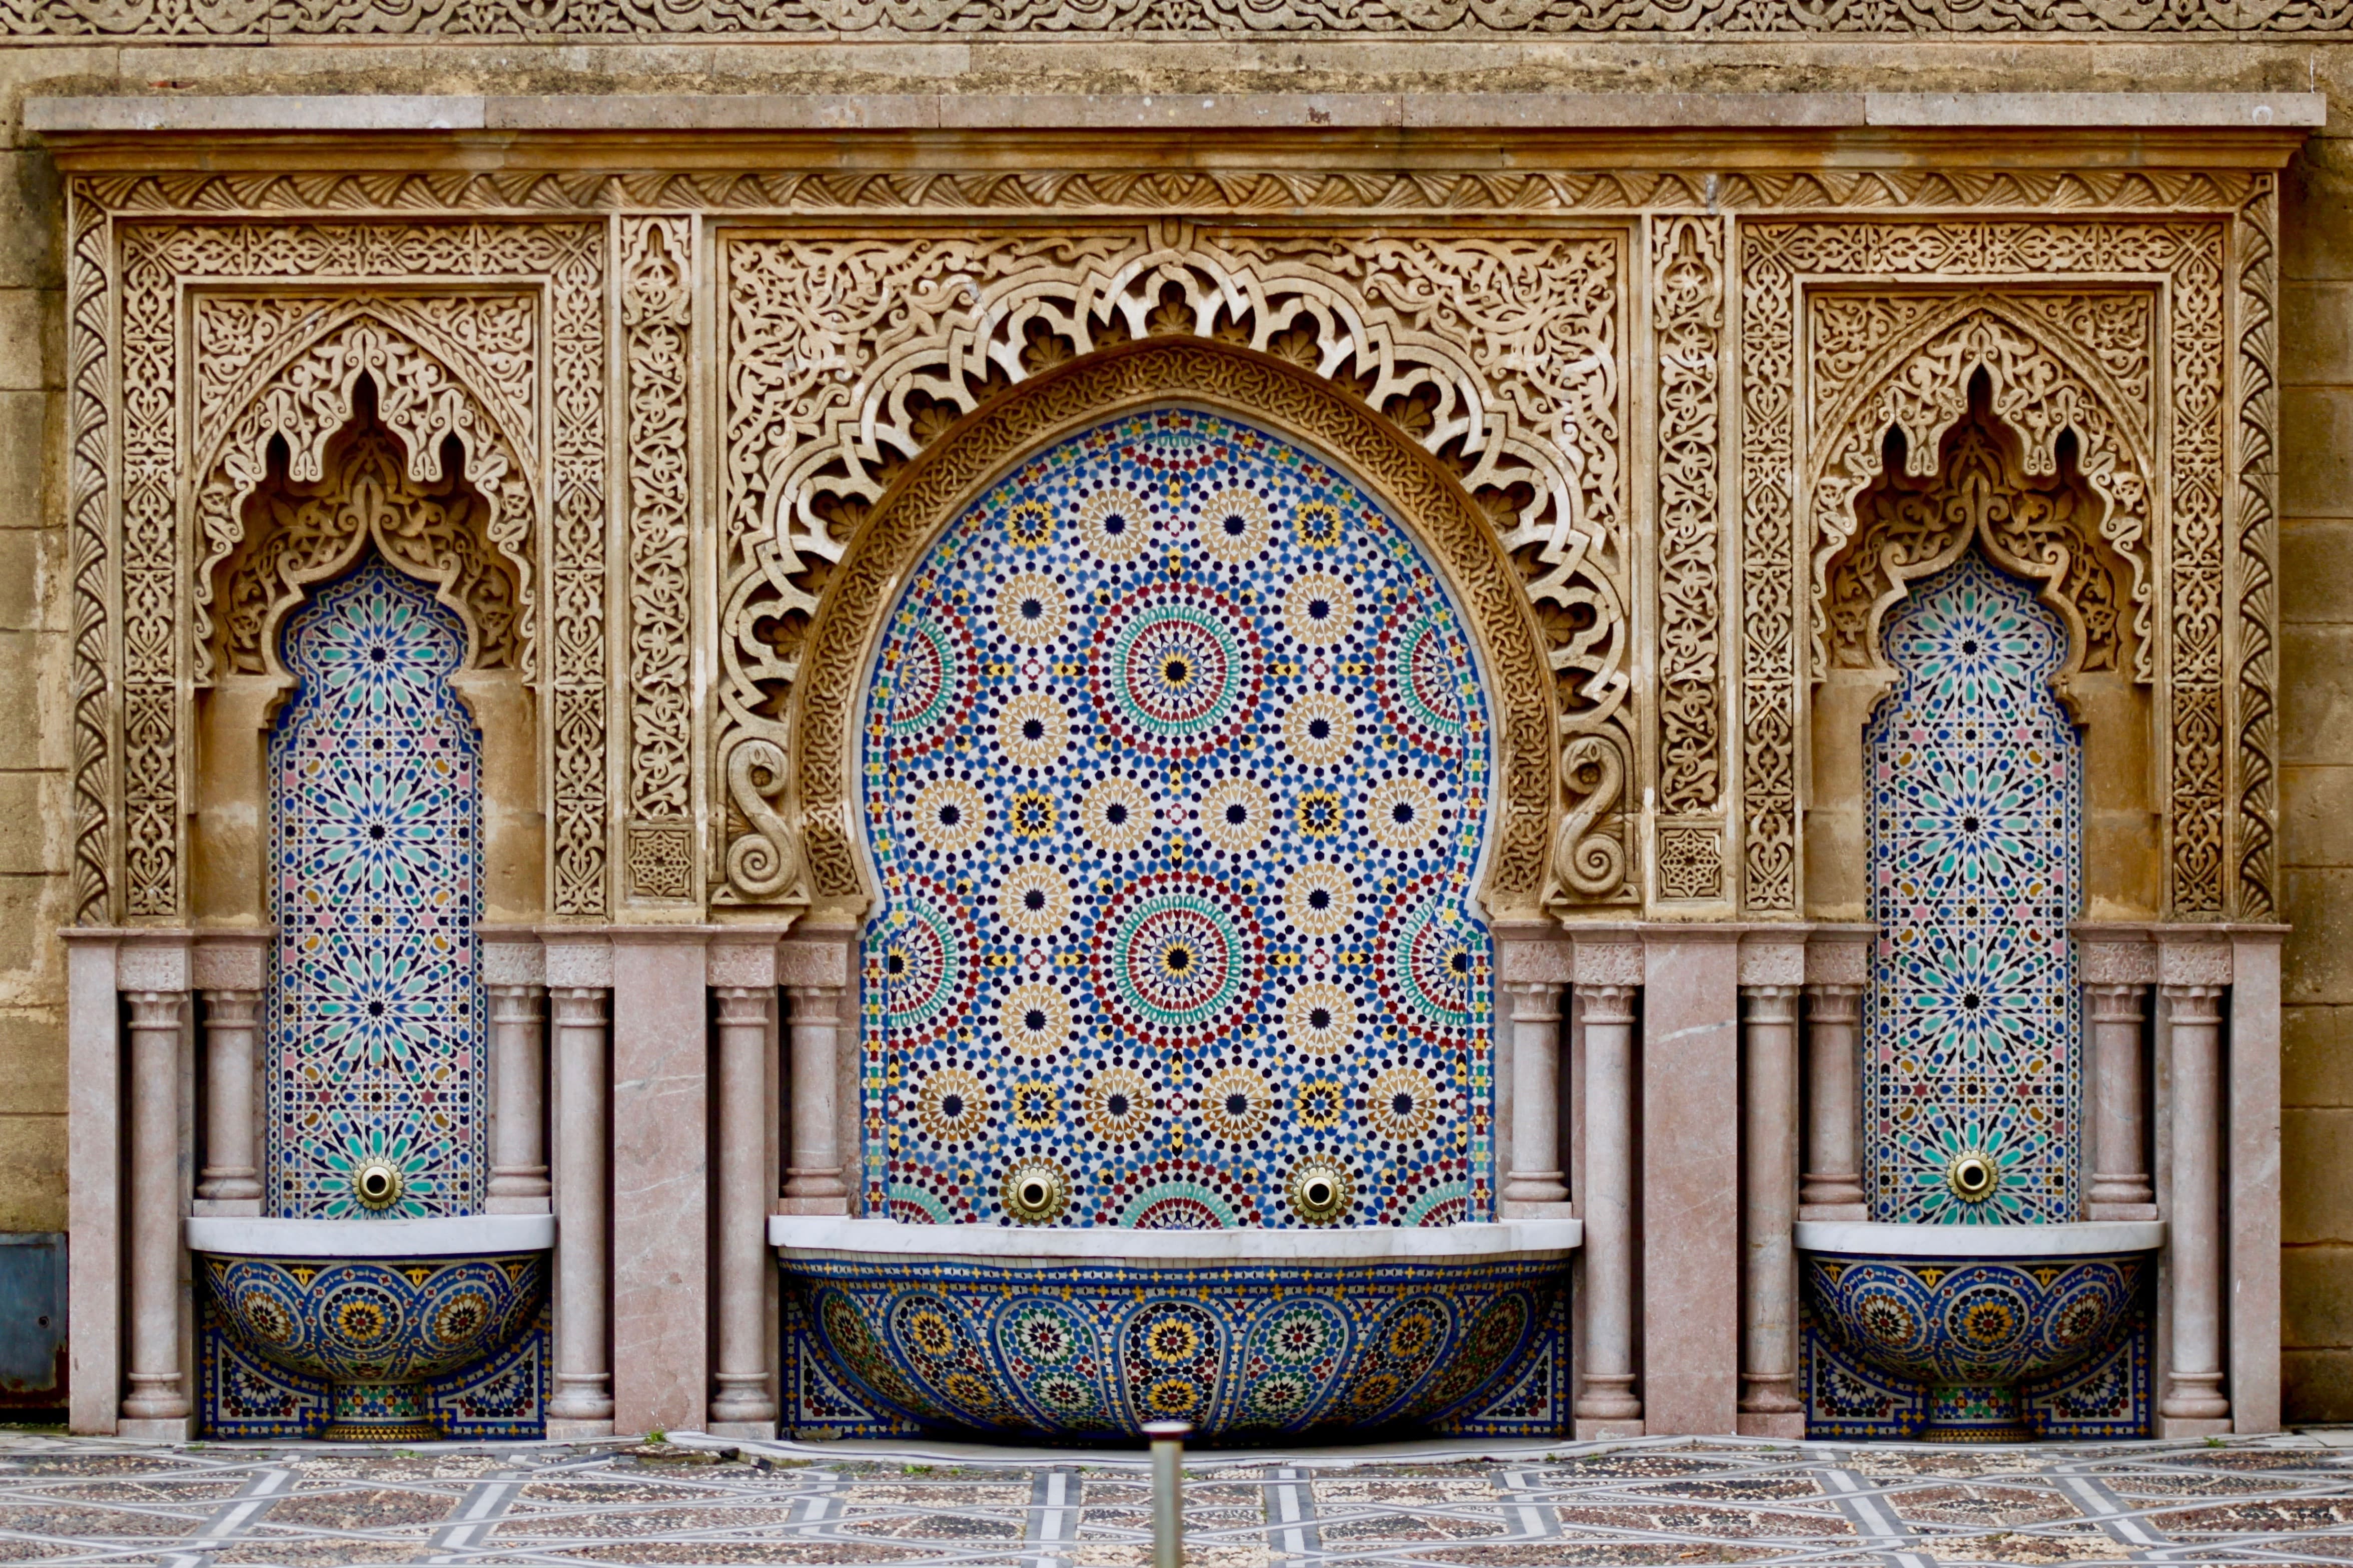 visit Morocco in 9 days from Fes